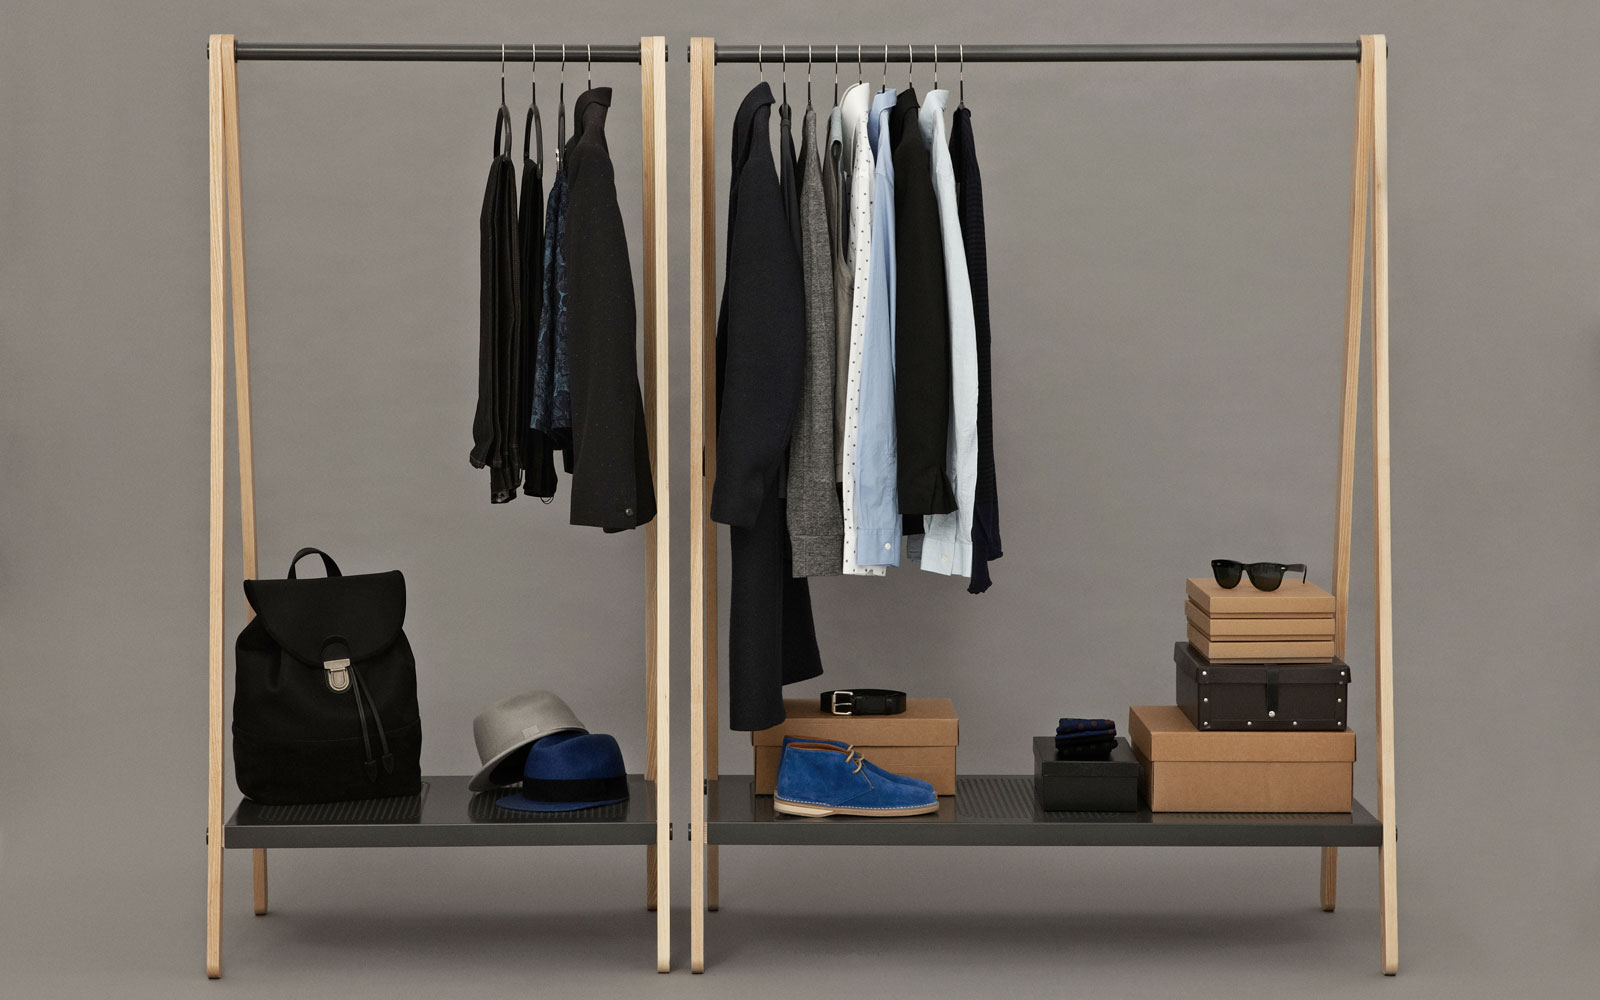 clothing rack with shoes, shirts, and sunglasses in a plain room